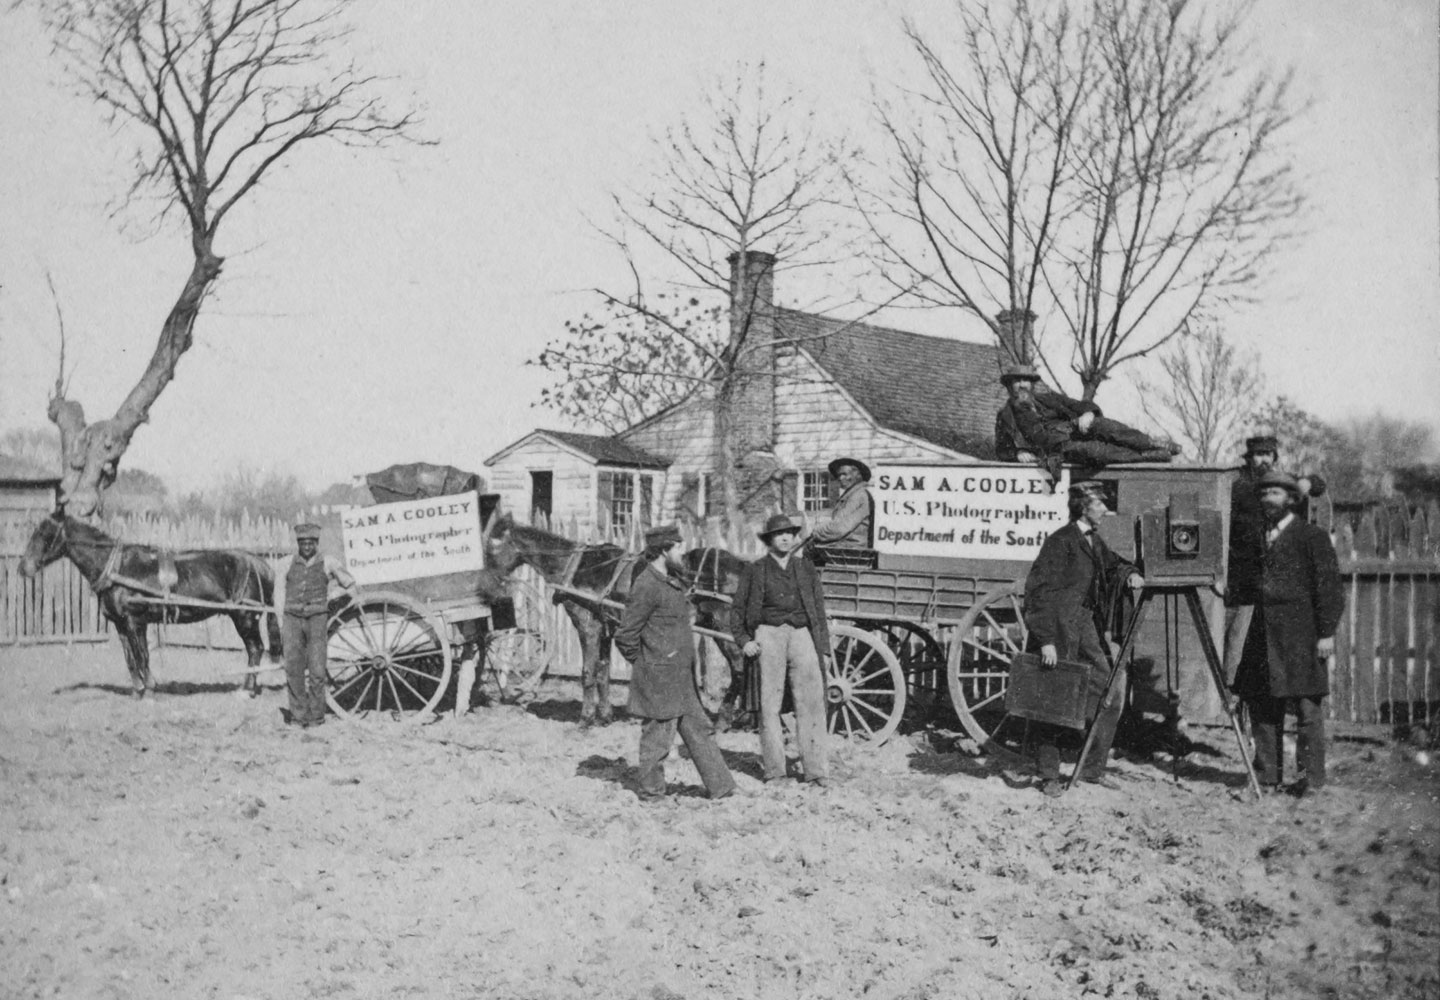 Stereograph shows a group of men standing next to wagons labeled 'Sam A. Cooley U.S. Photographer Department of the South', with a camera on the left, and two African American men employed as drivers